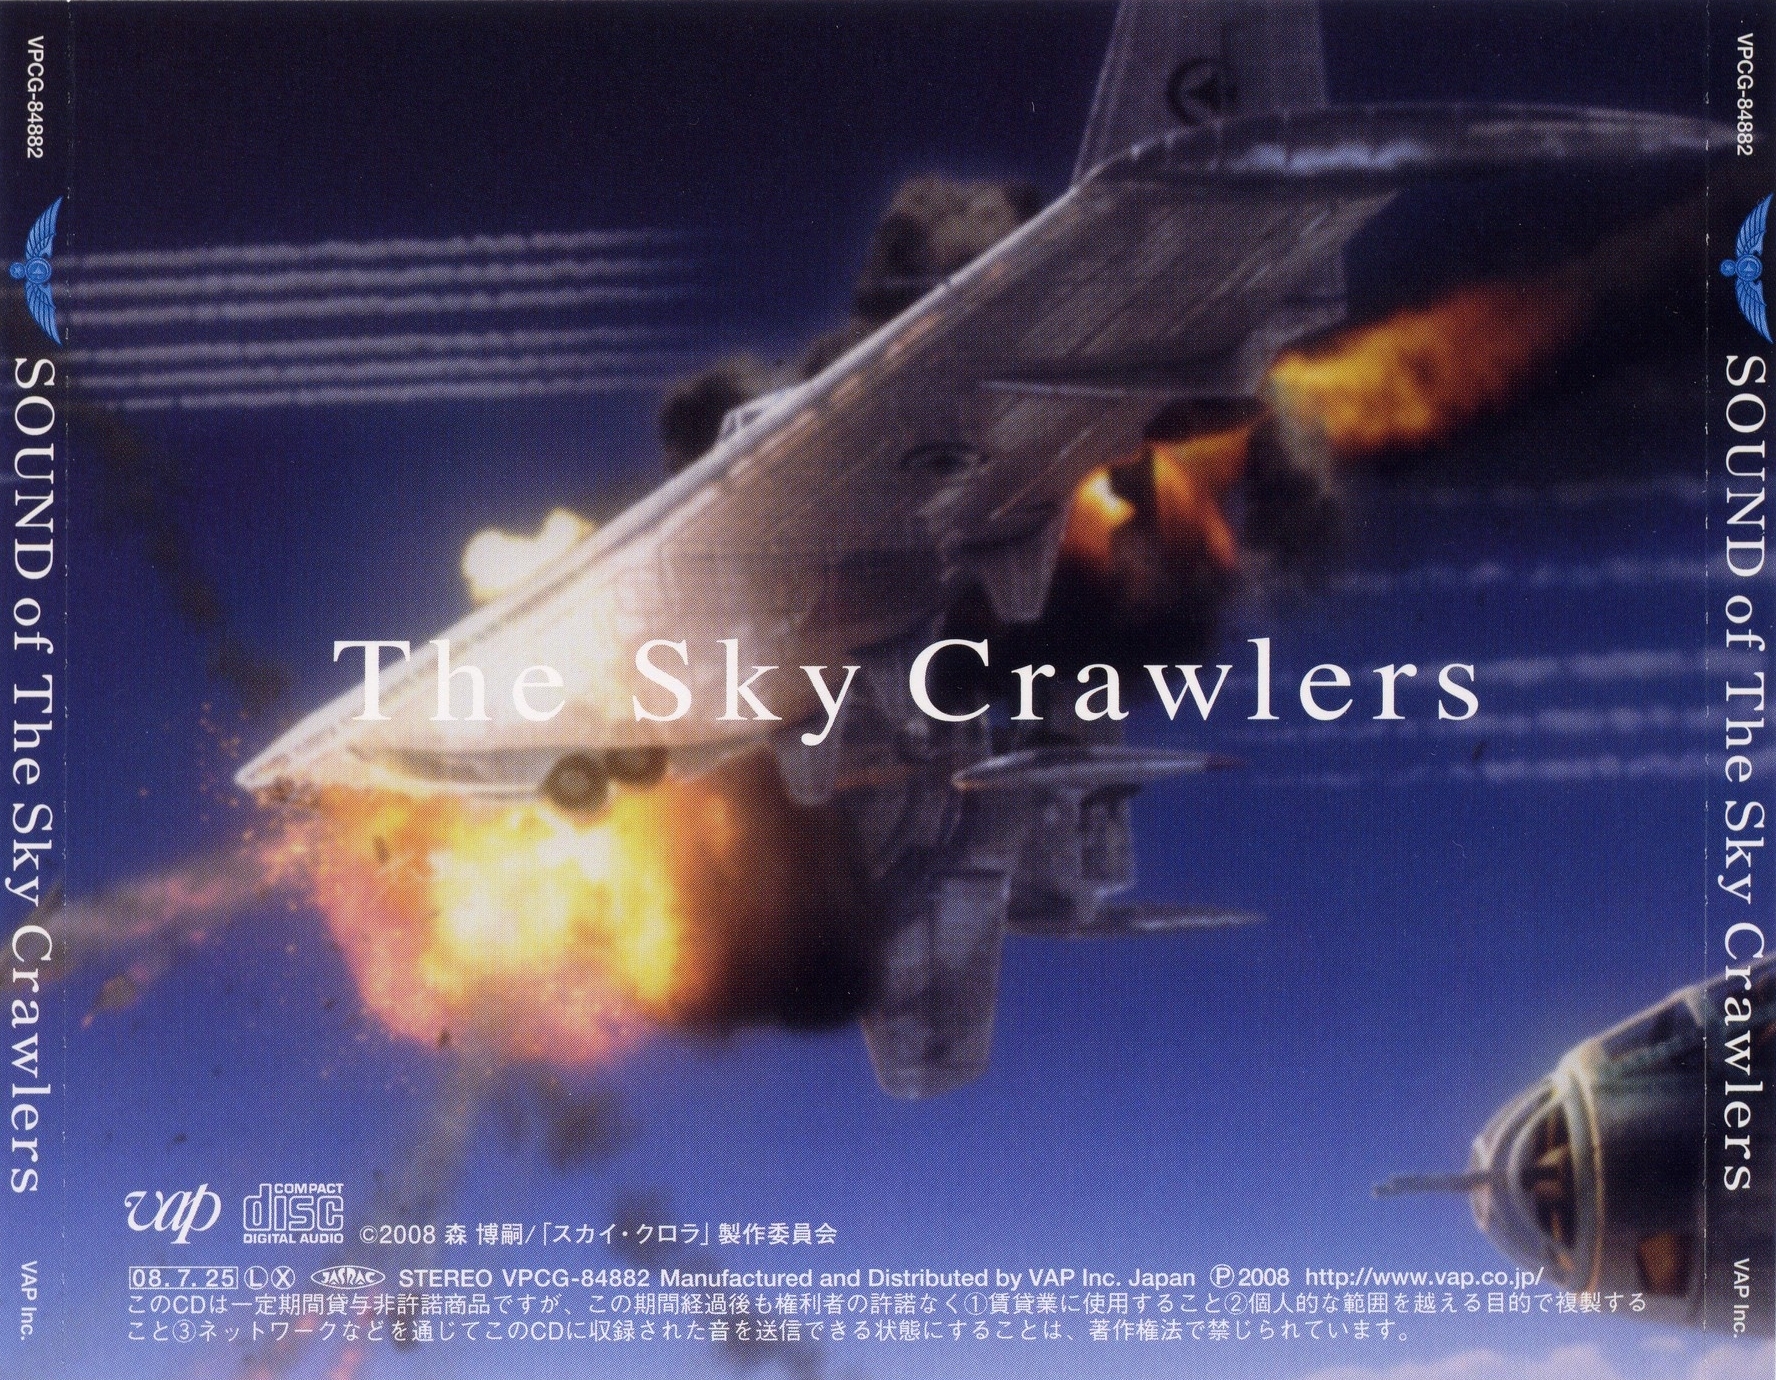 SOUND of The Sky Crawlers (2008) MP3 - Download SOUND of The Sky